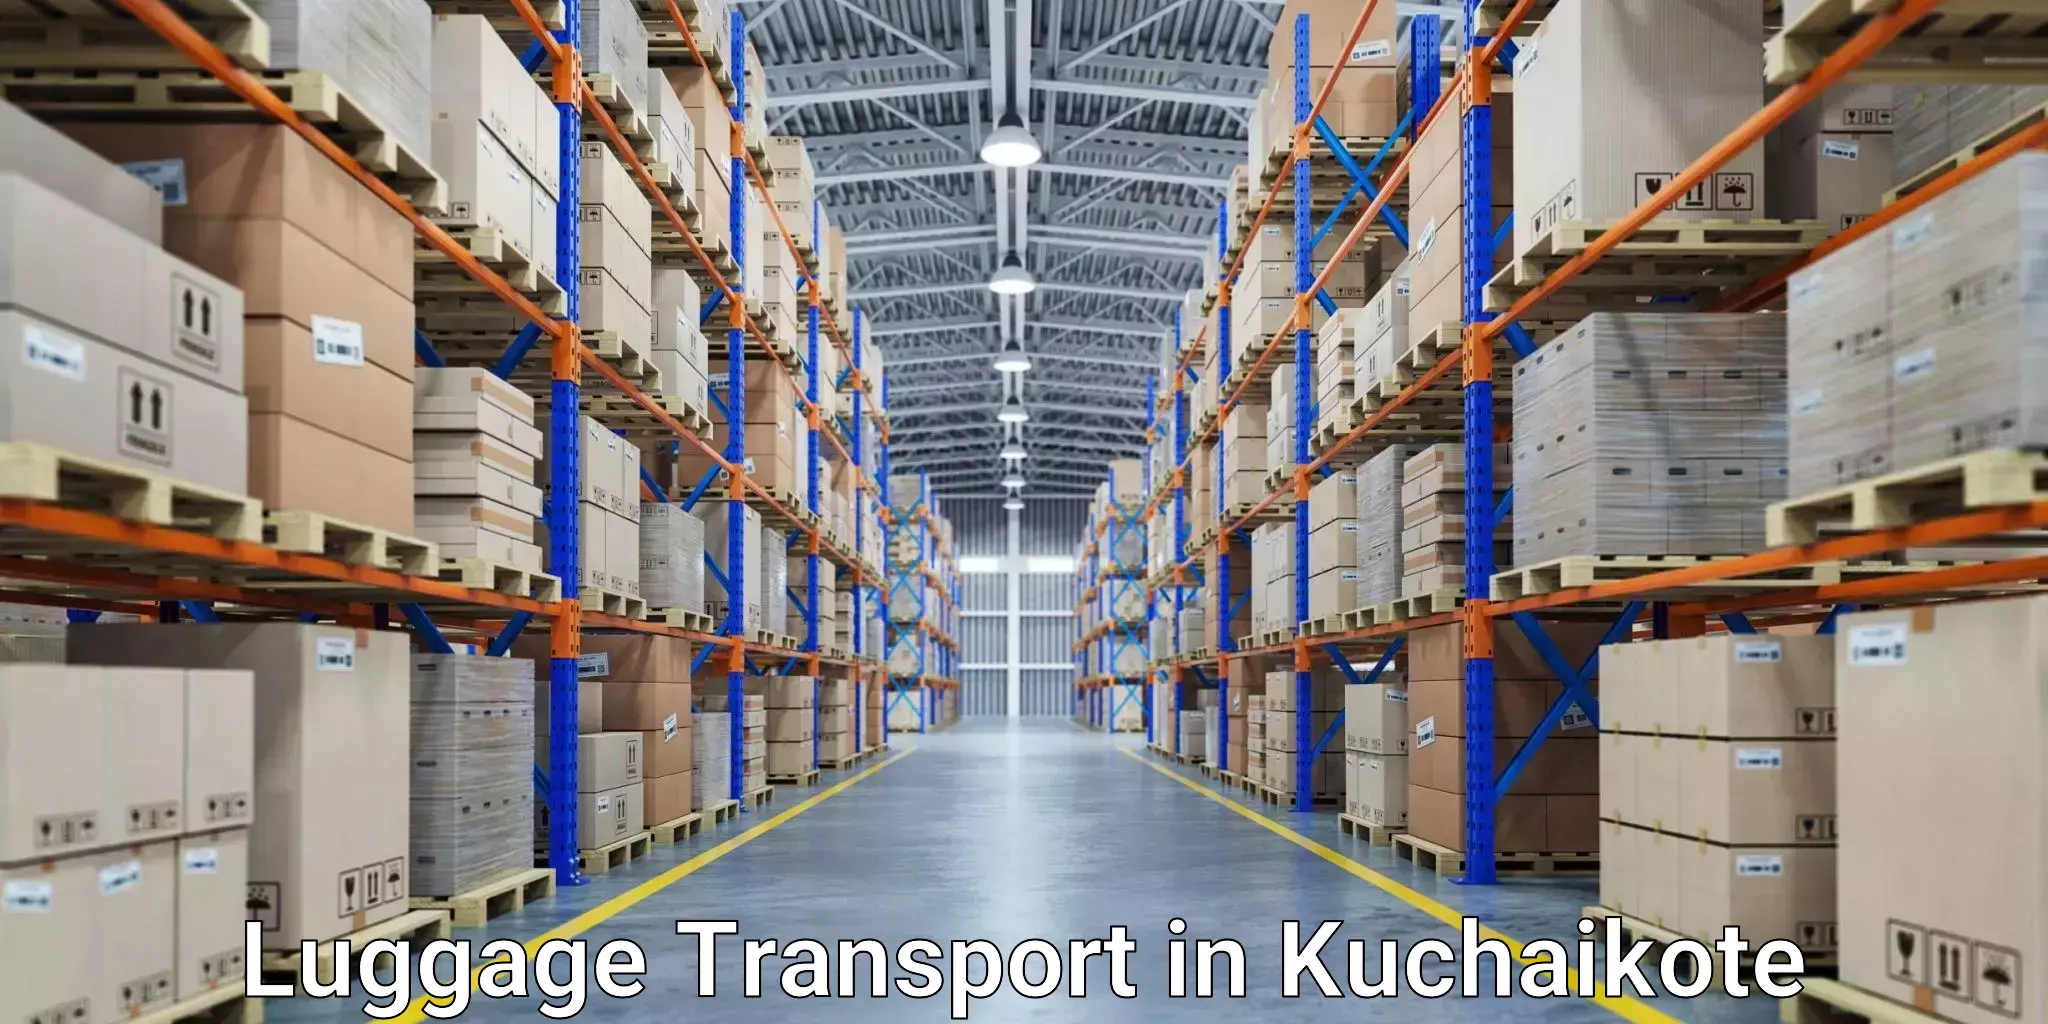 Luggage transport operations in Kuchaikote